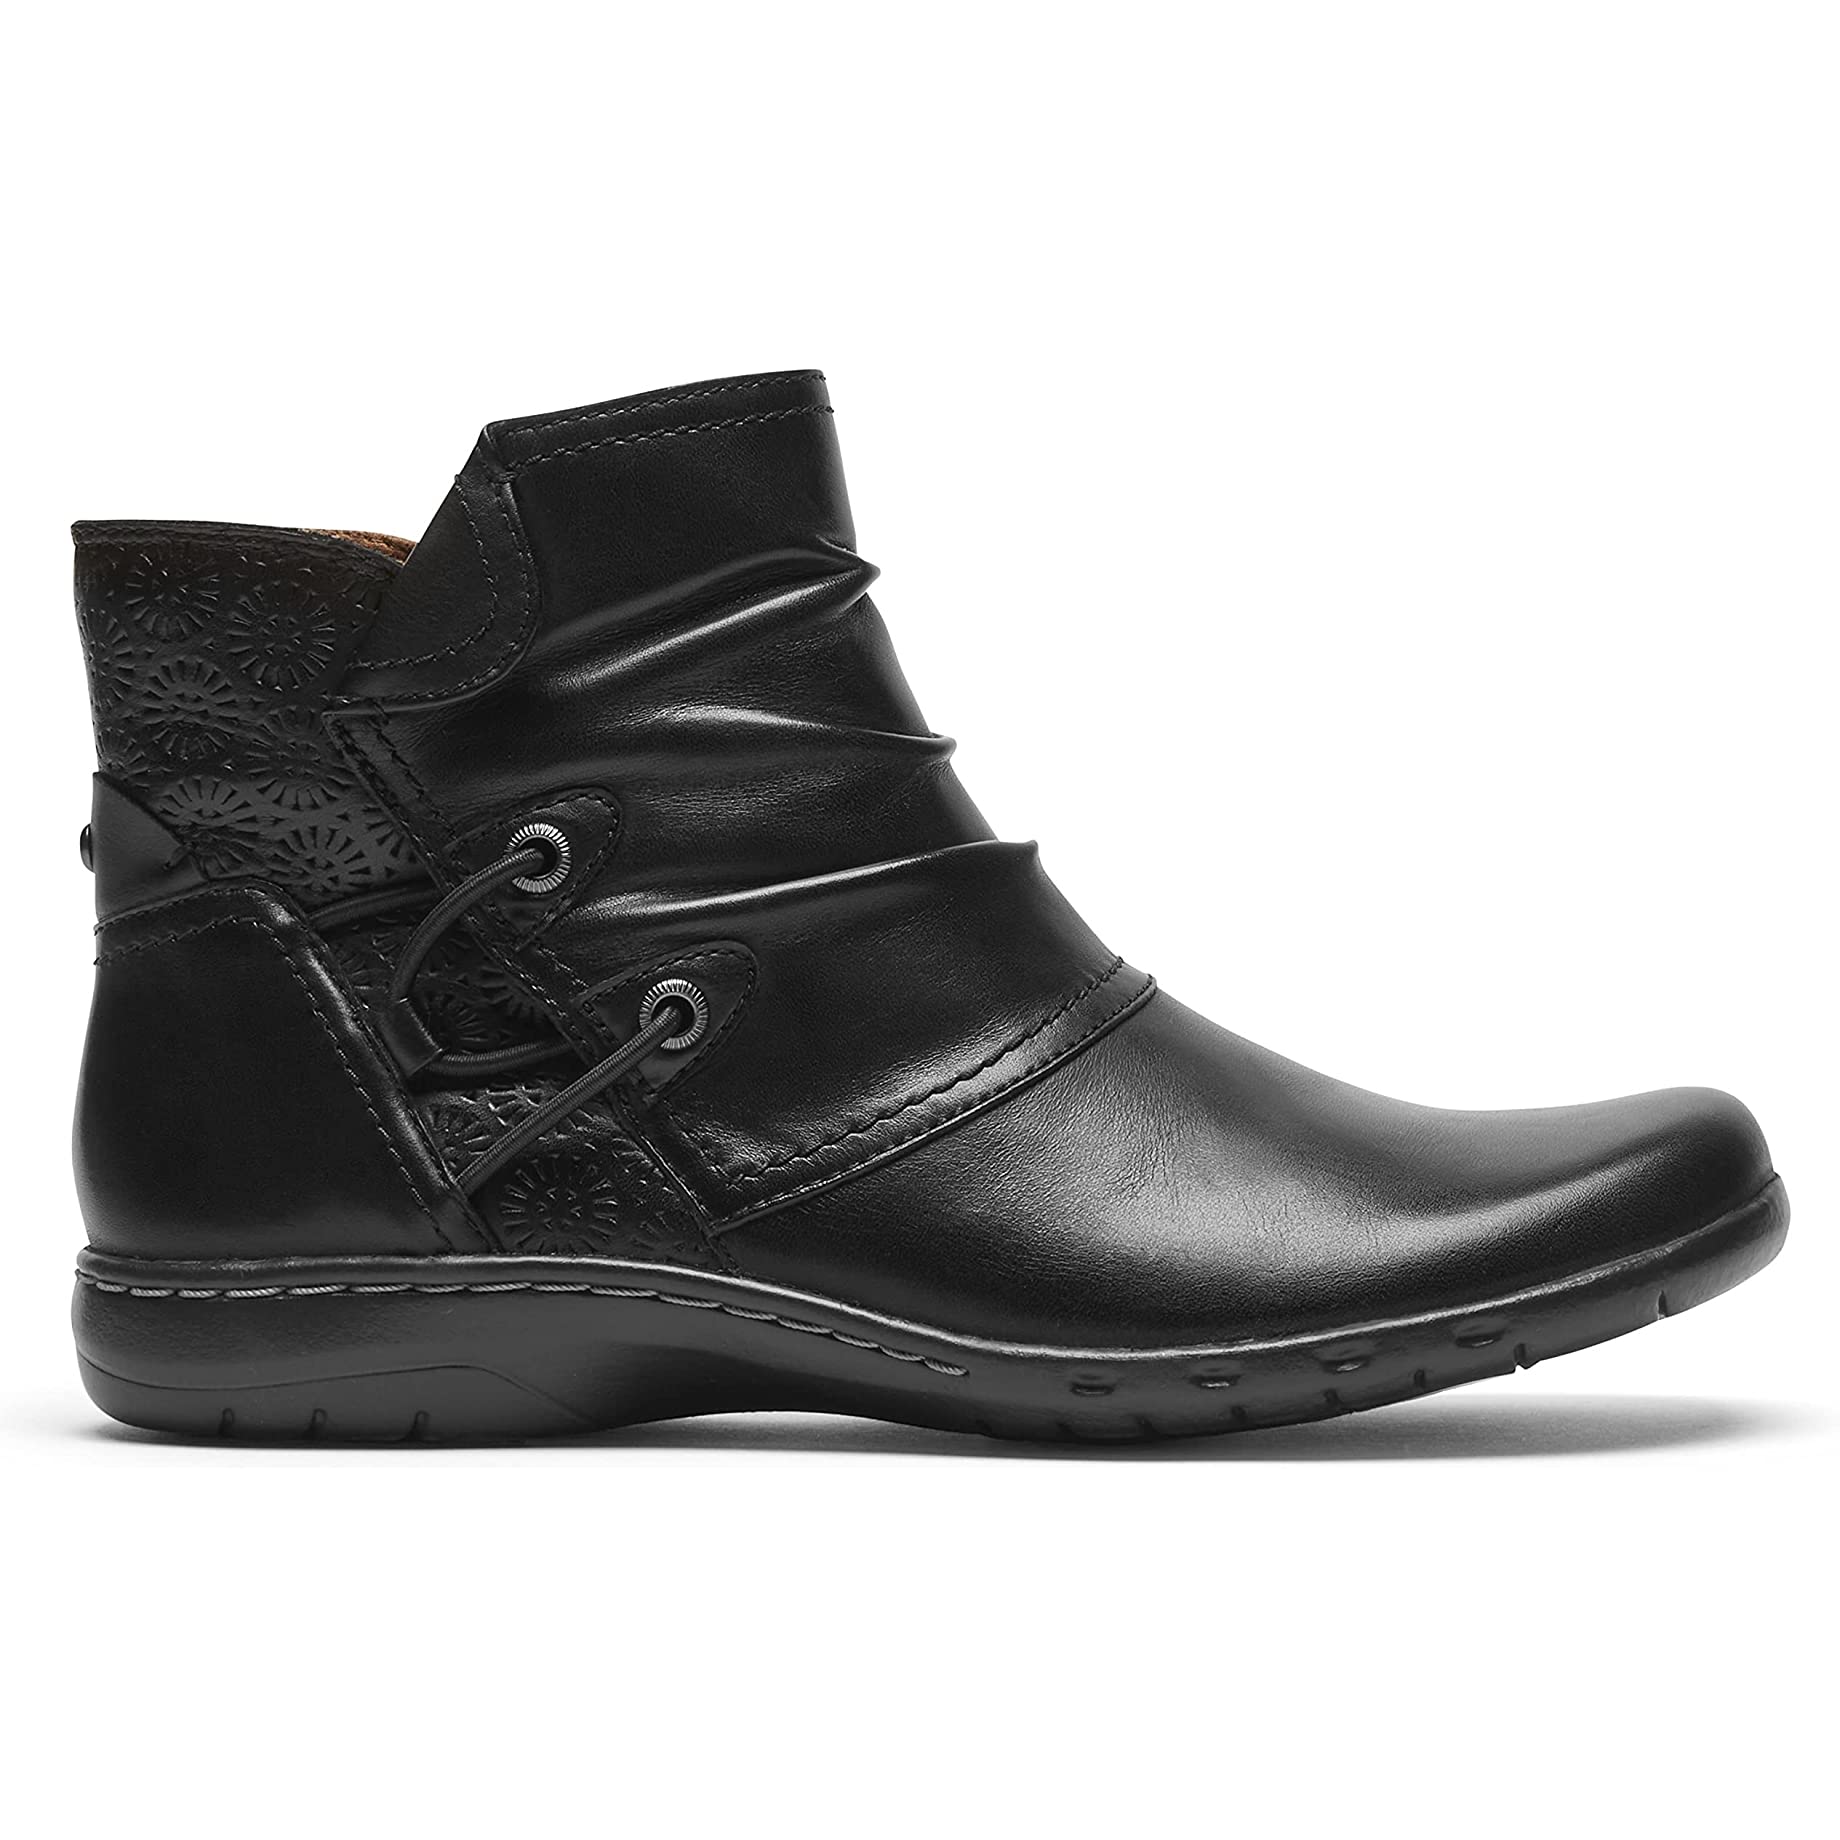 Cobb Hill, Penfield Ruched Boot, Women, Black Leather